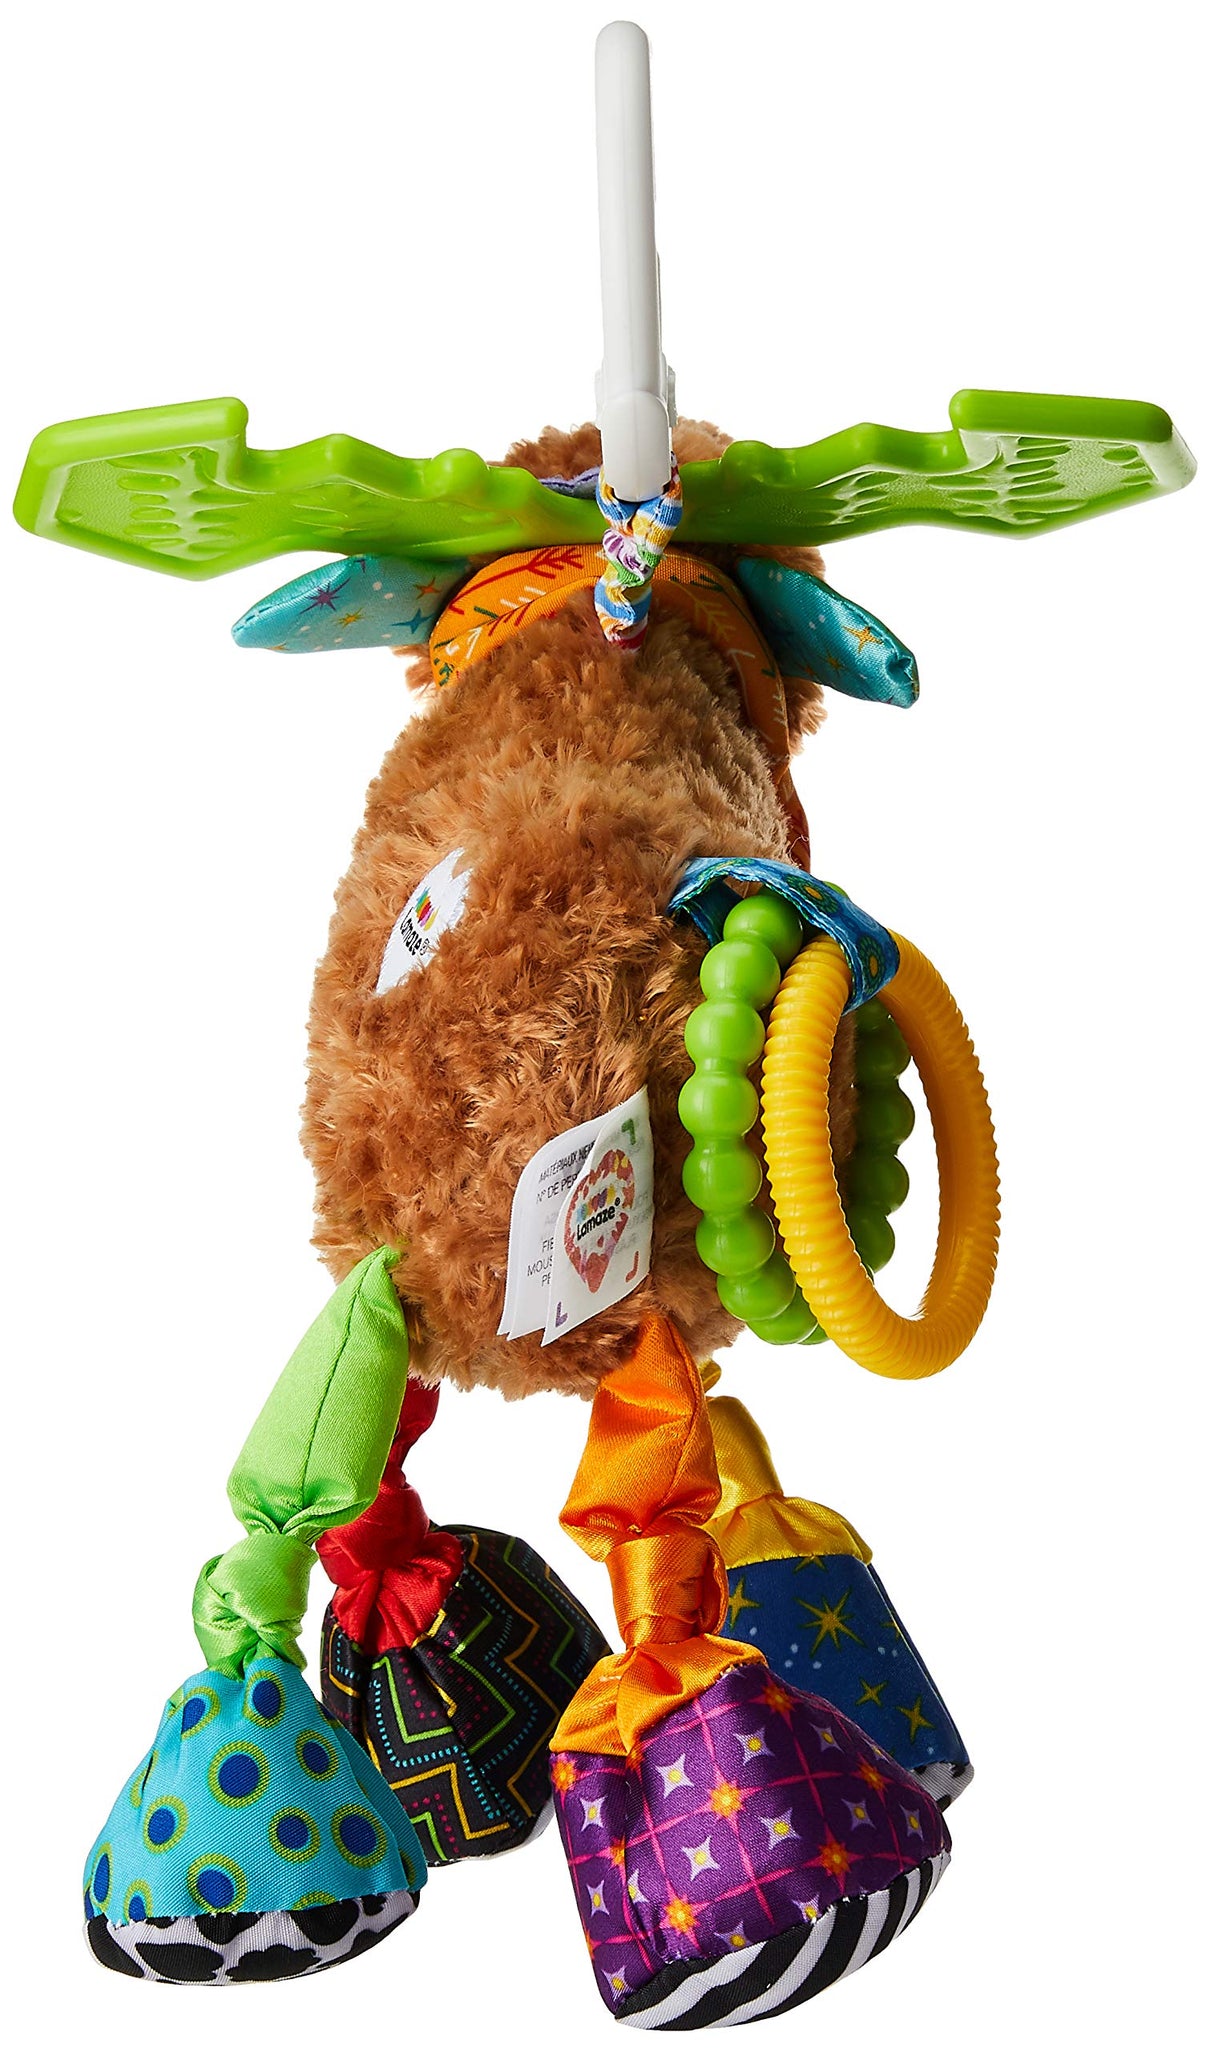 TOMY Lamaze Mortimer The Moose, Clip On Toy